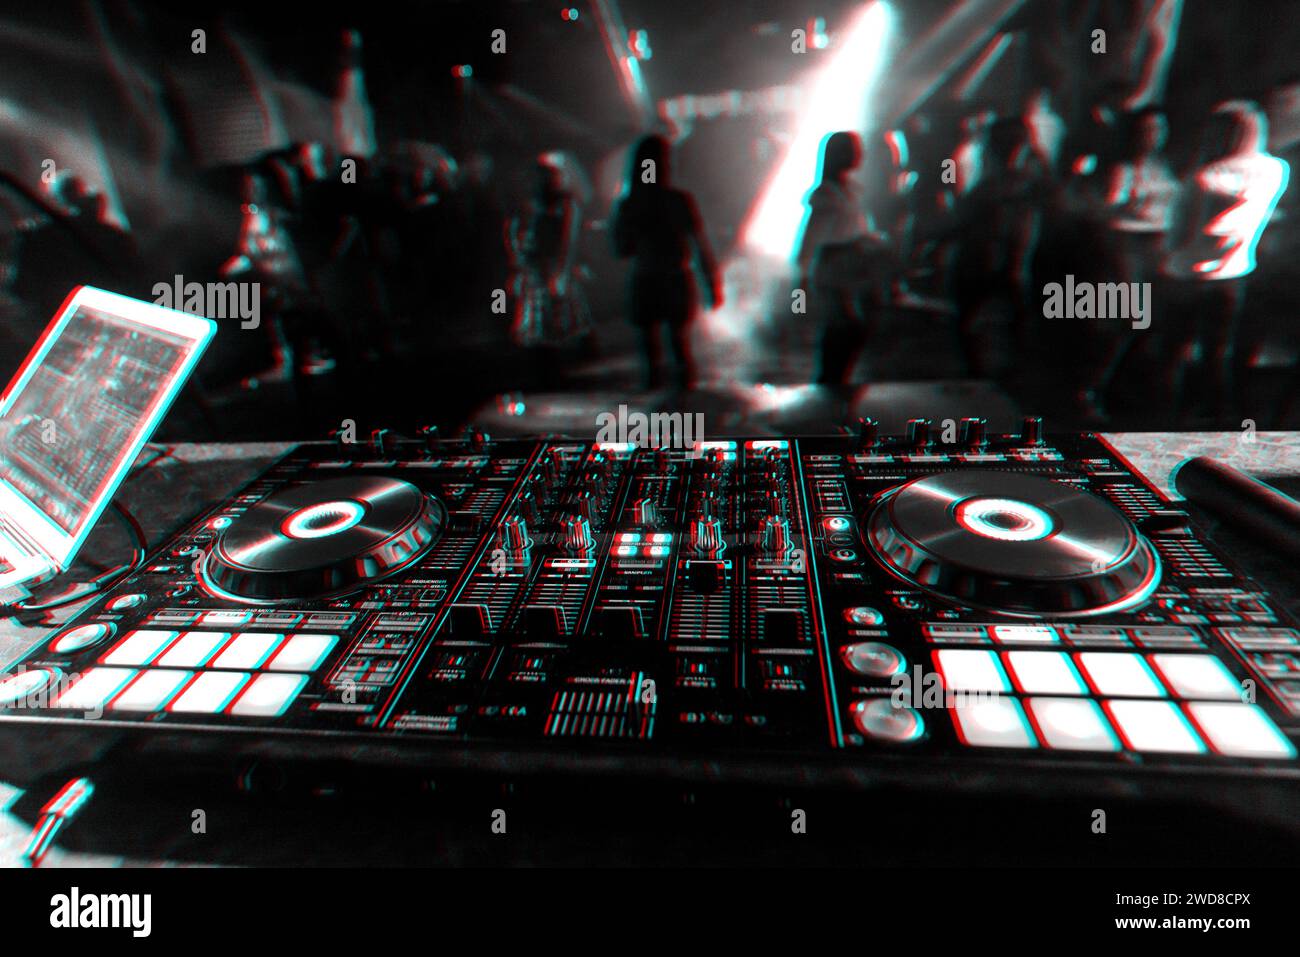 professional DJ mixer controller for mixing music in a nightclub with dancing people on the dance floor. Black and white photo with glitch effect and Stock Photo